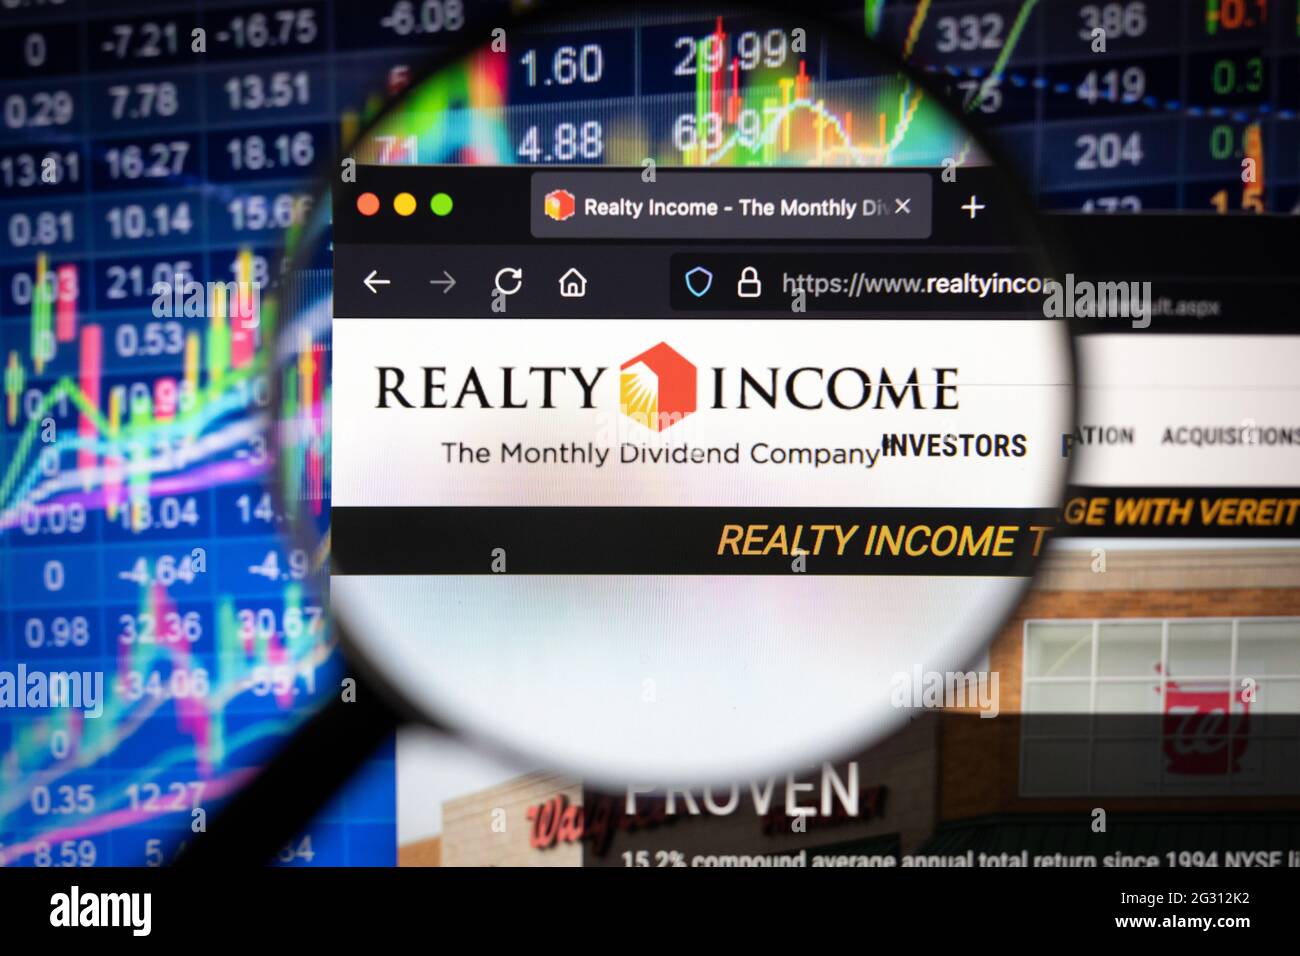 Realty Income company logo on a website with blurry stock market developments in the background, seen on a computer screen through a magnifying glass Stock Photo